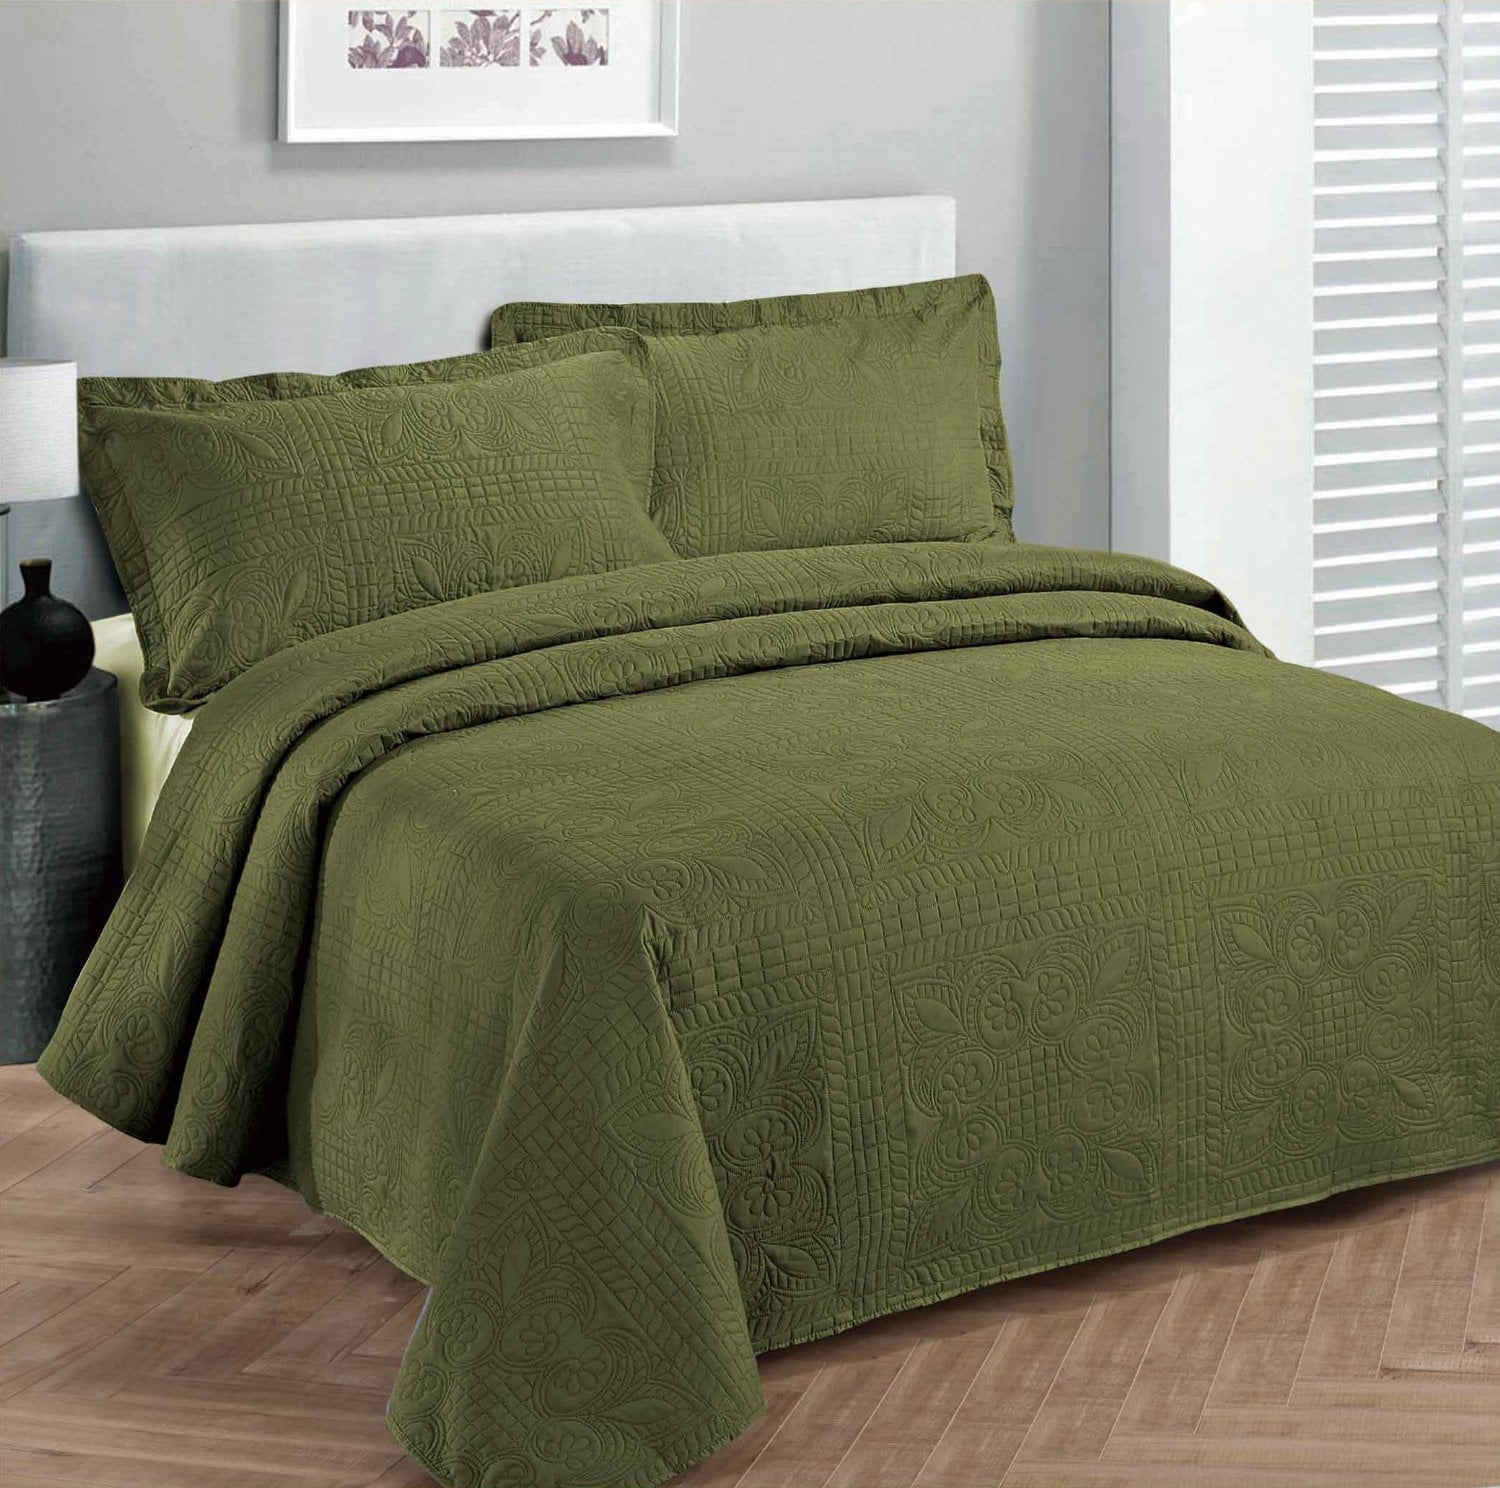 Fancy Linen 3pc Embossed Coverlet Bedspread Set Oversized Bed Cover Solid Floral Daisy Pattern New # Allis King//California King, Light Green